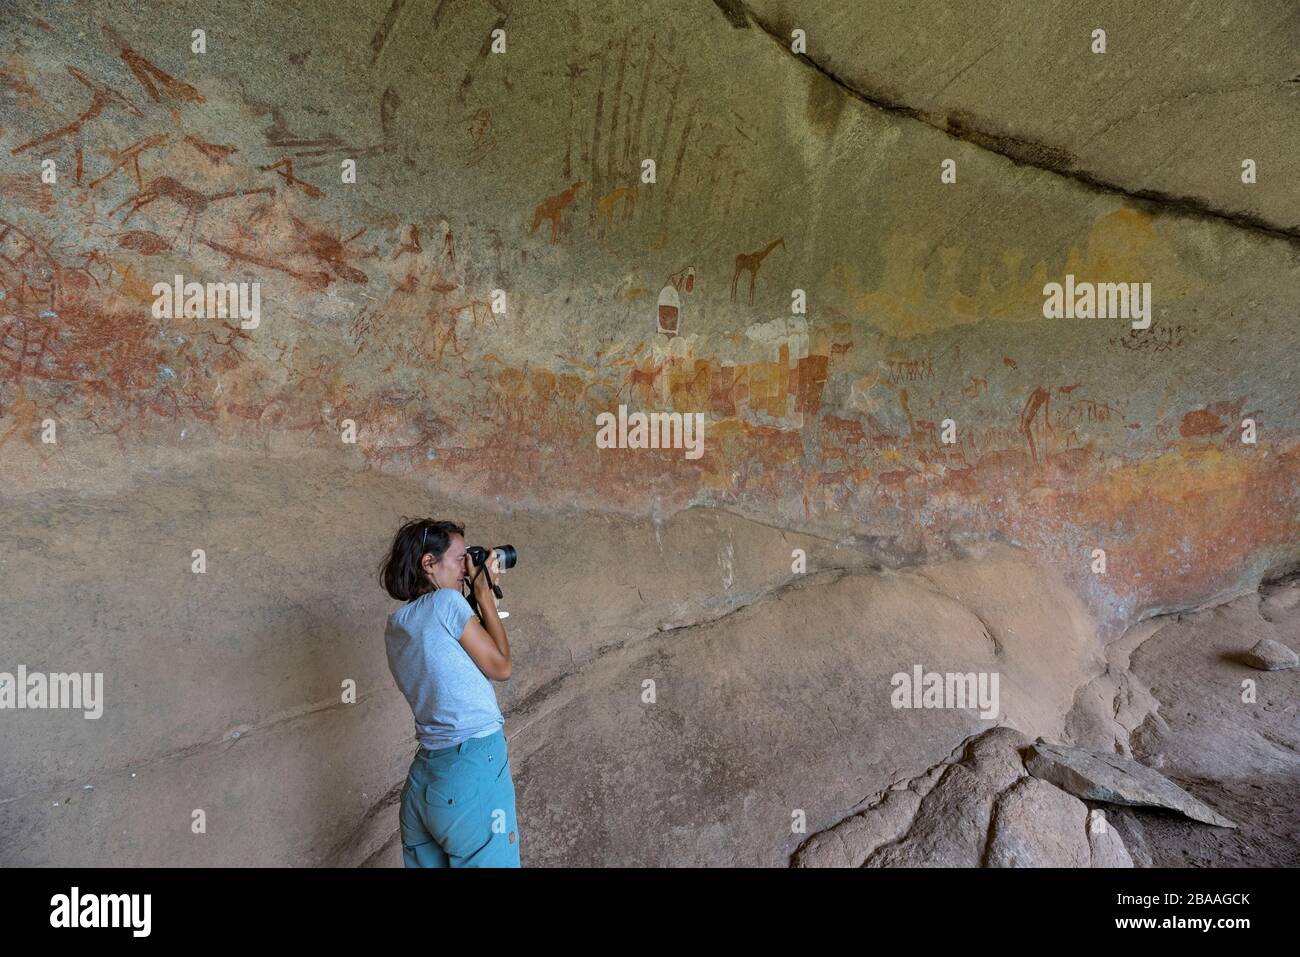 A tourist takes a photograph of the San rock art in Inanke Cave, Matobo National Park, Zimbabwe. Stock Photo